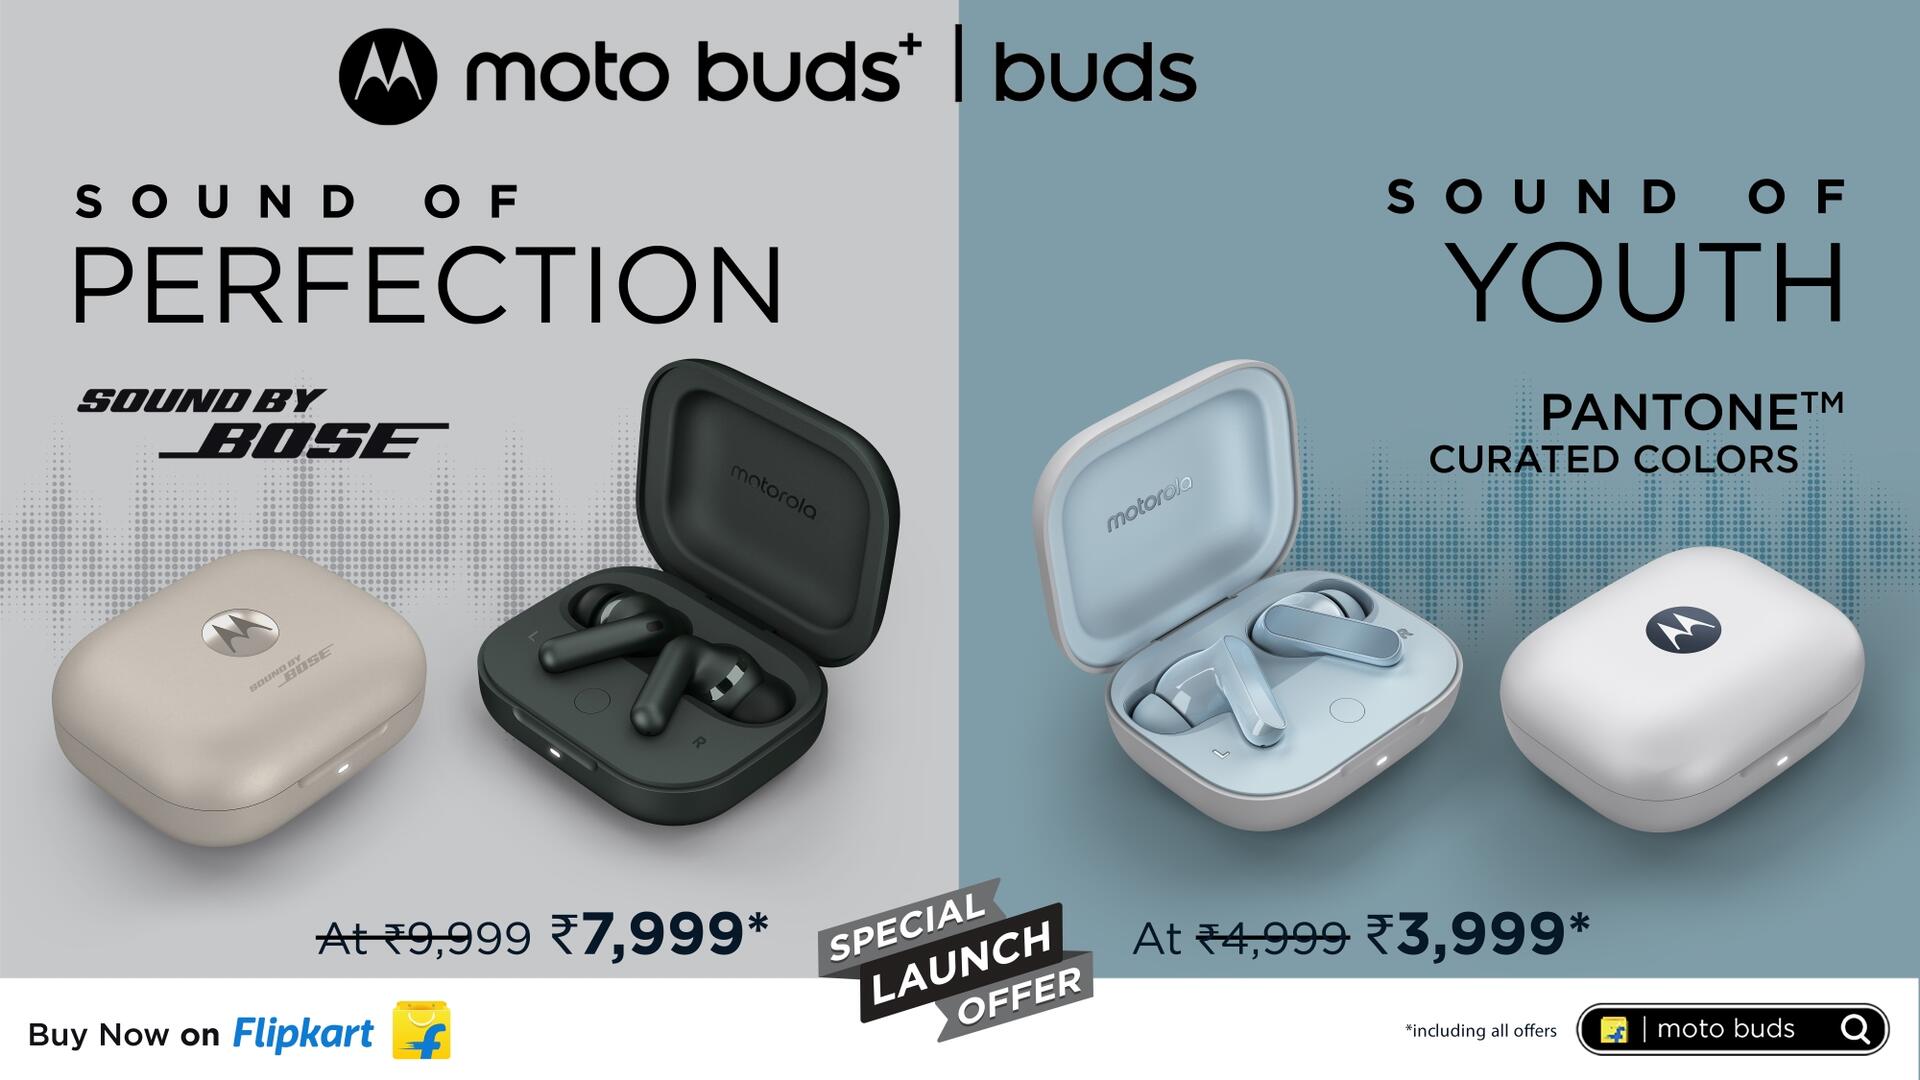 Motorola’s newly launched moto buds+ and moto buds launched in collaboration with Bose go on sale at an effective price of 7,999* and 3,999*Flipkart and motorola.in